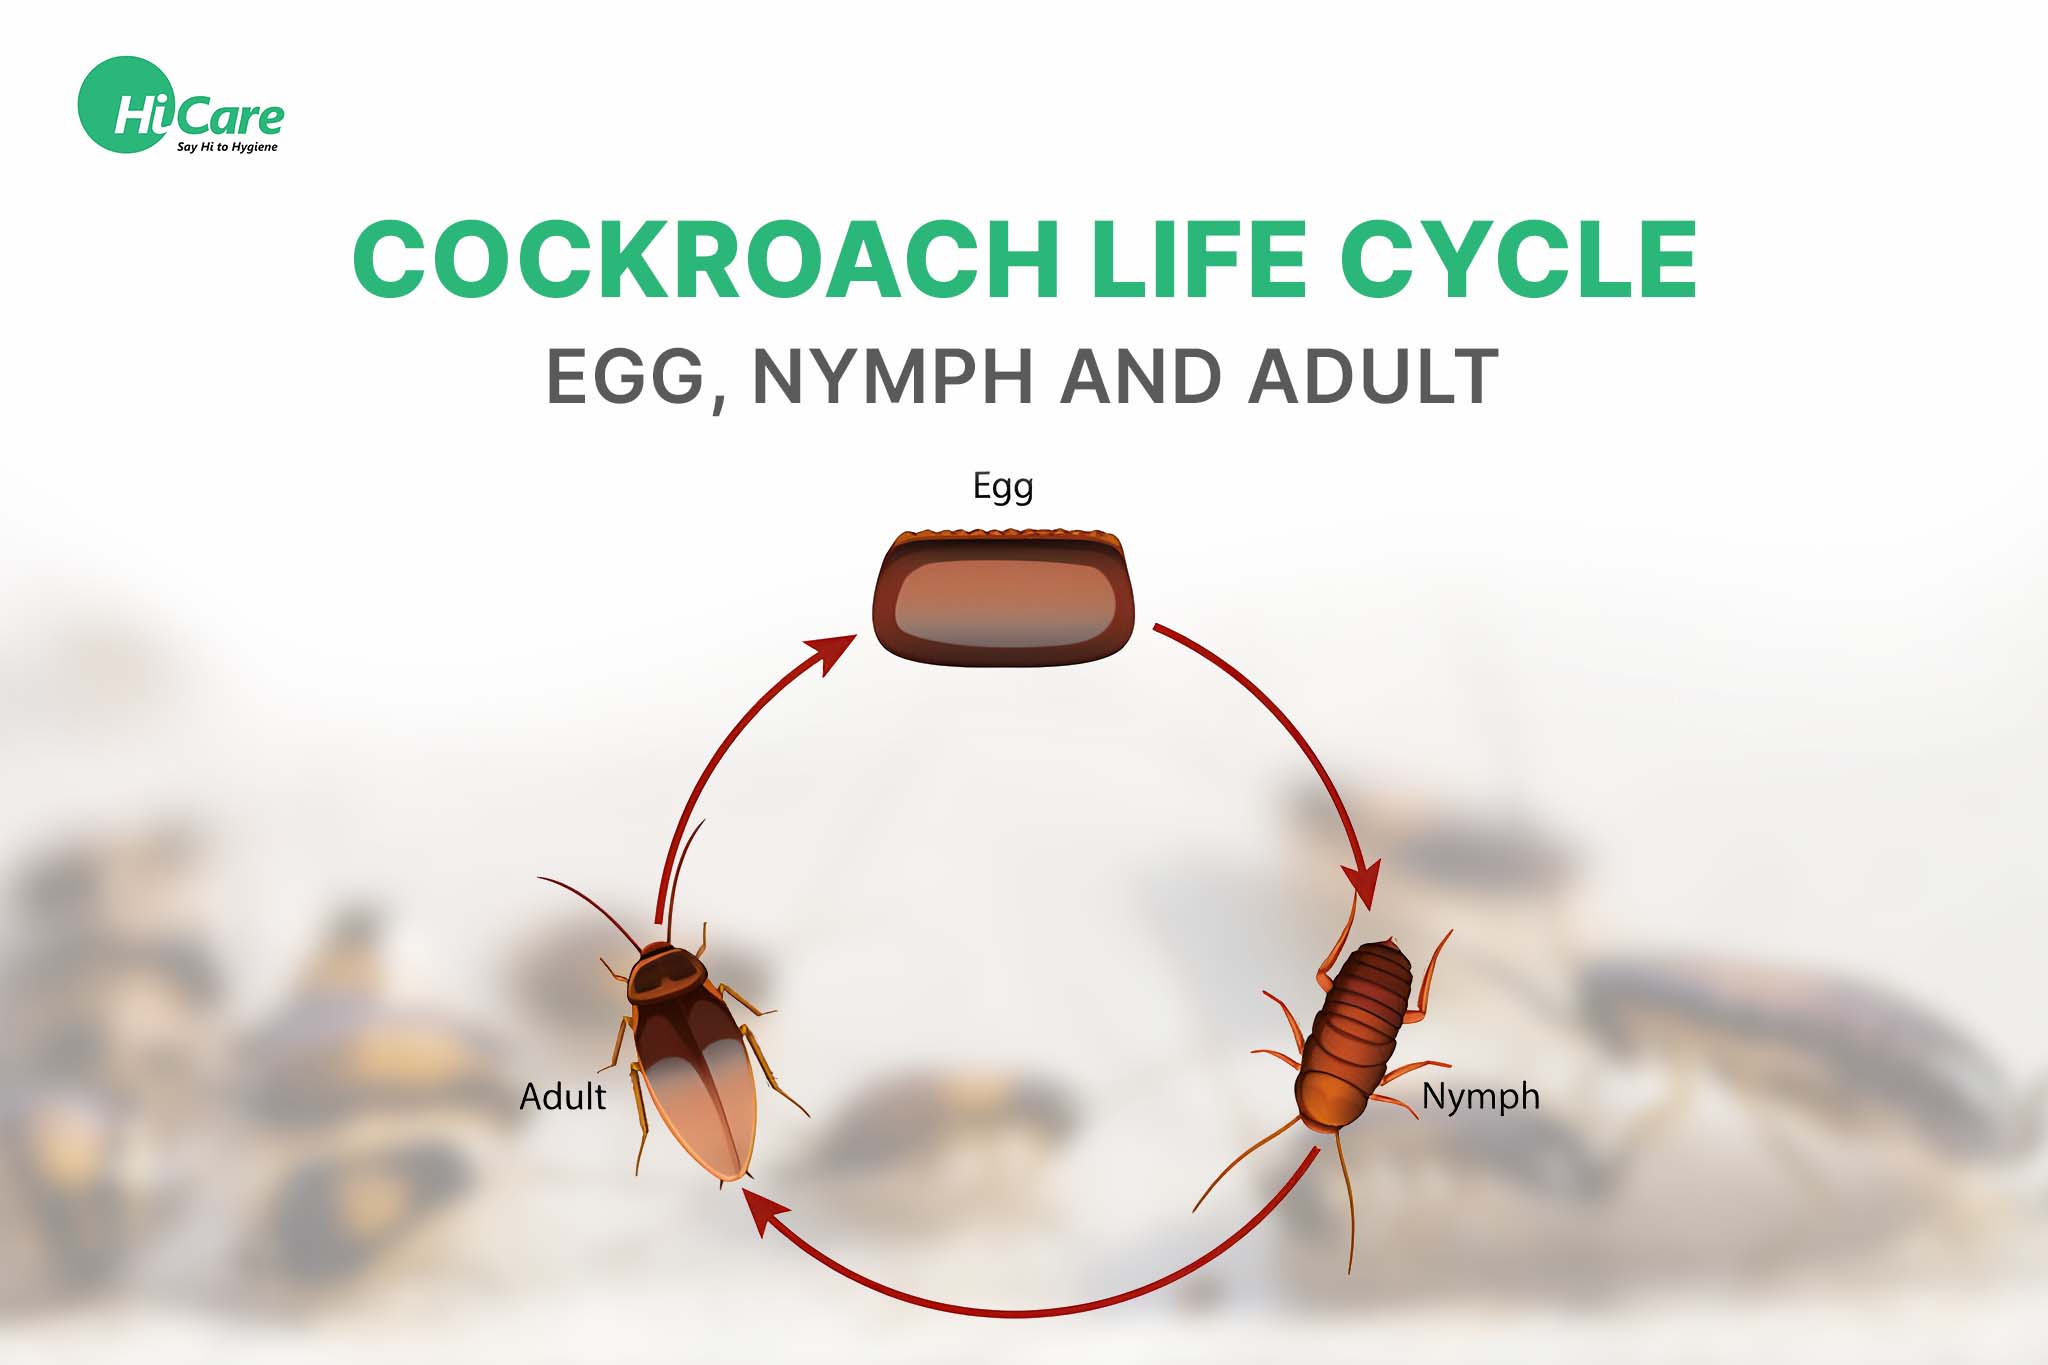 Cockroach Life Cycle – Egg, Nymph and Adult